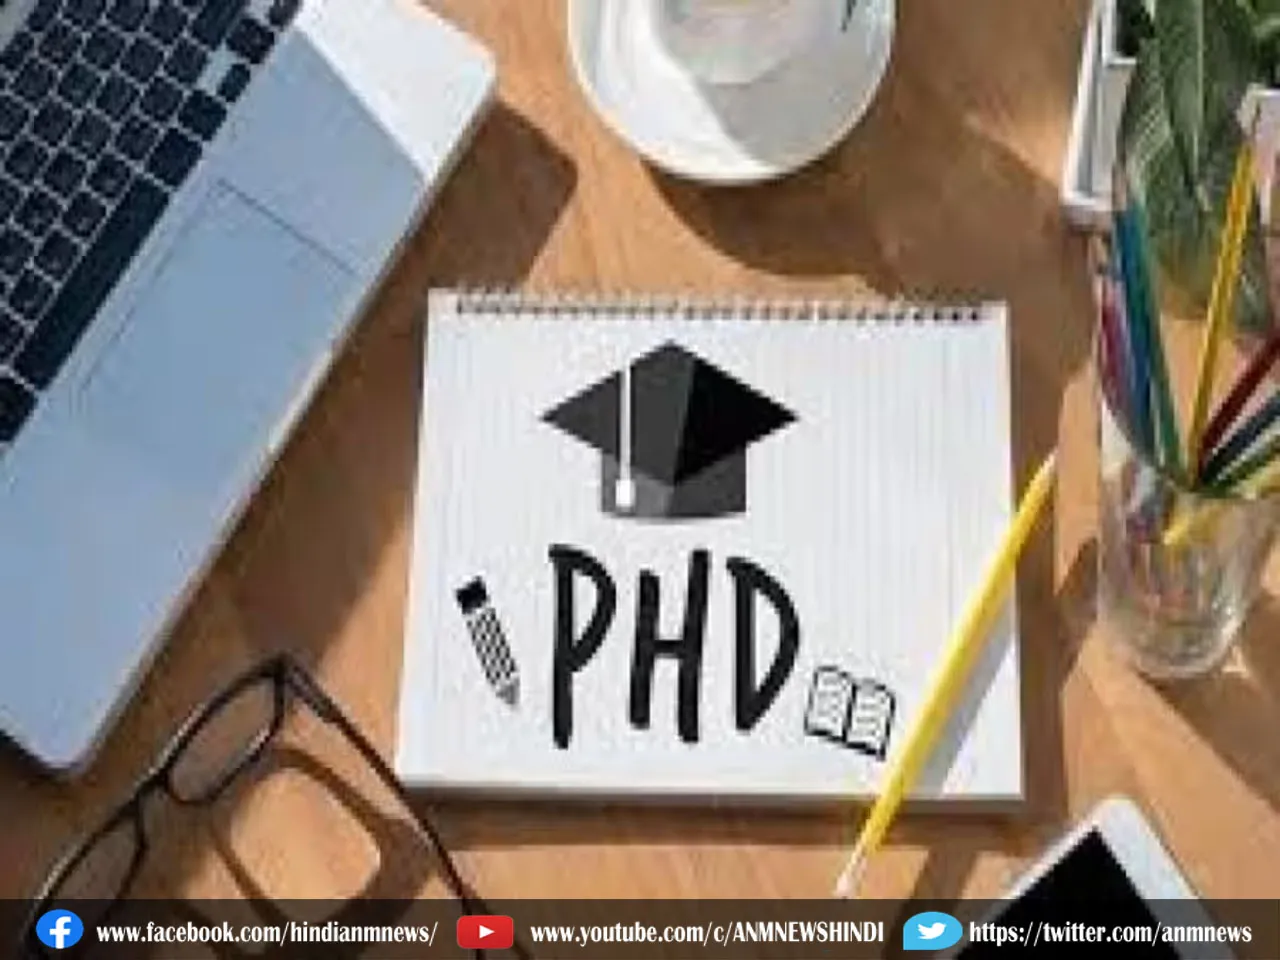 PHD and research